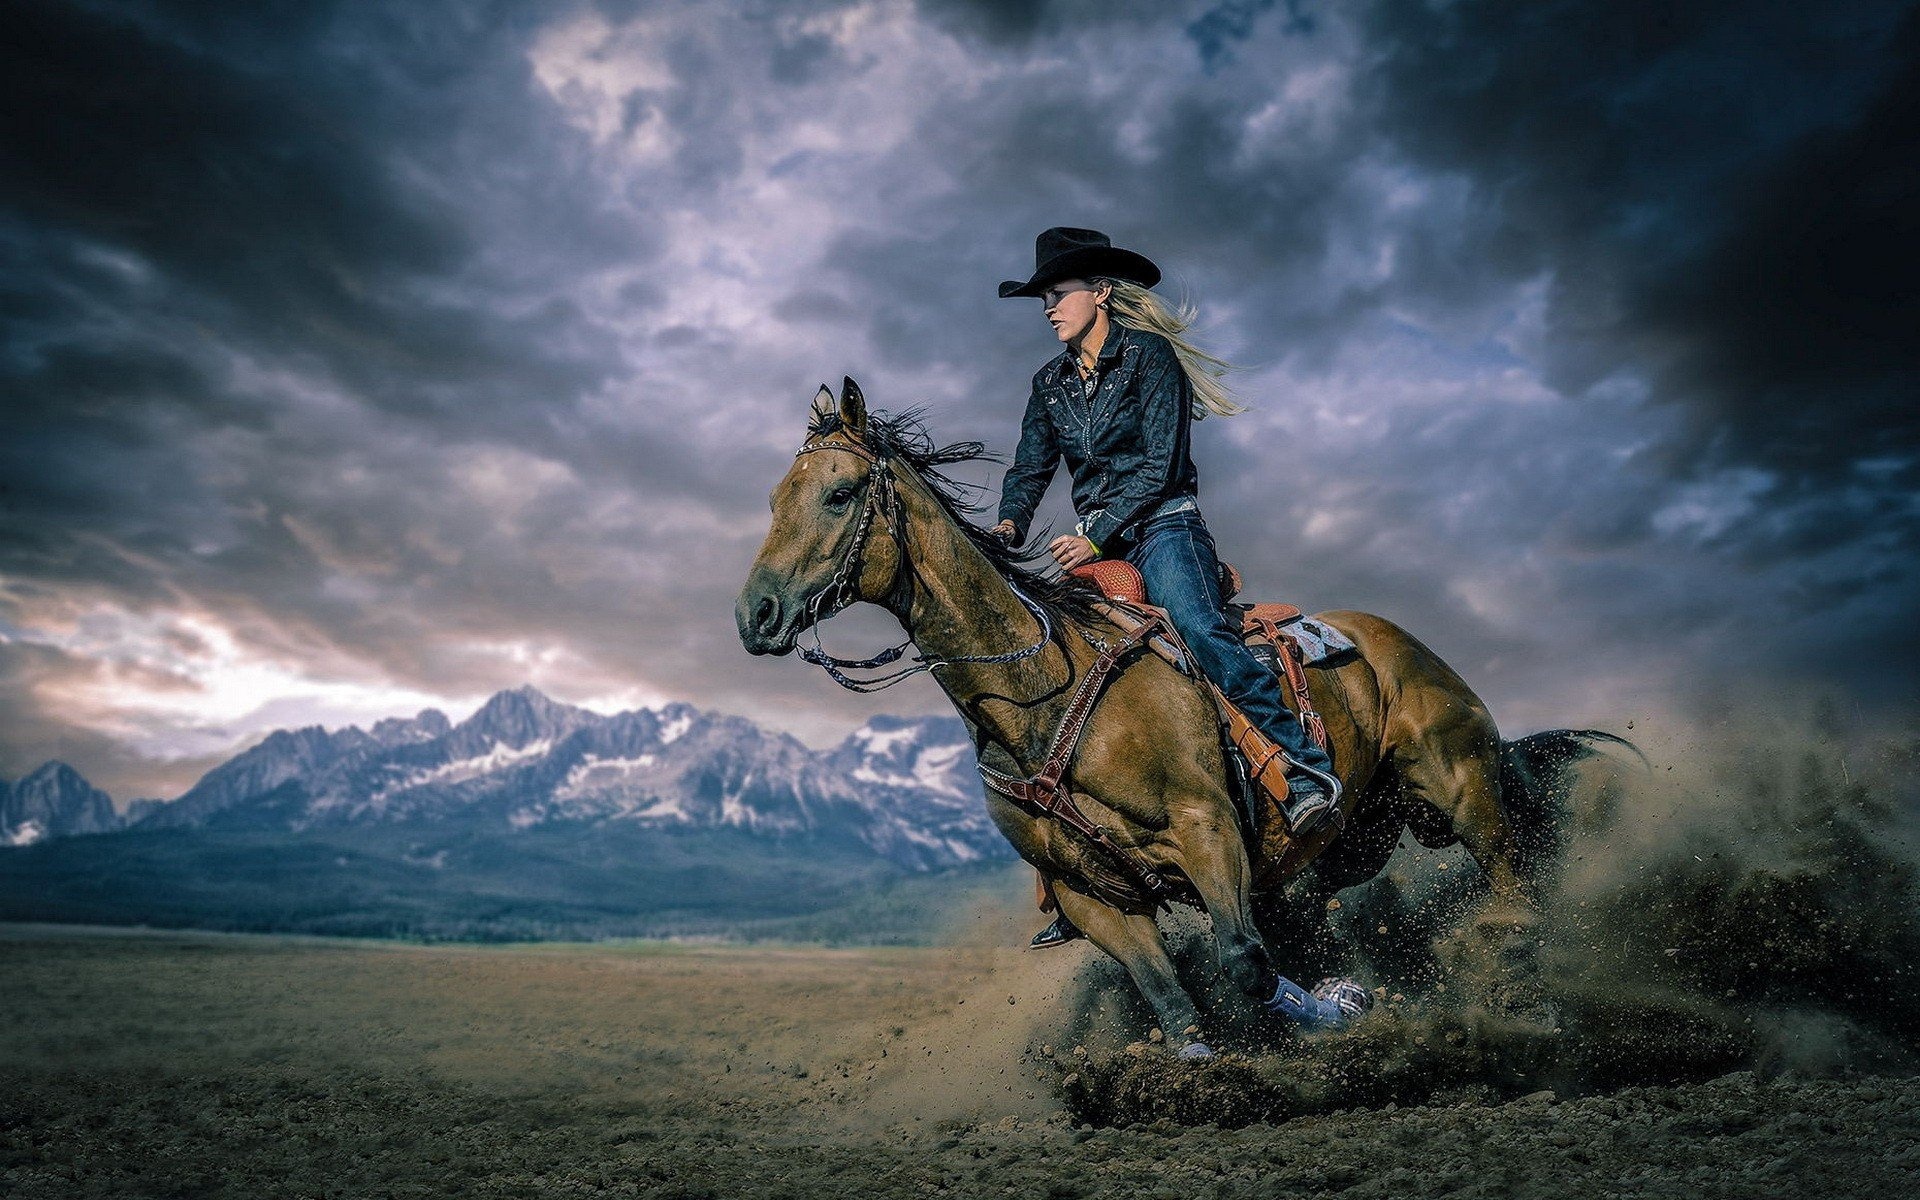 Equitation: A classic Western American style of horsemanship performed by a girl. 1920x1200 HD Wallpaper.